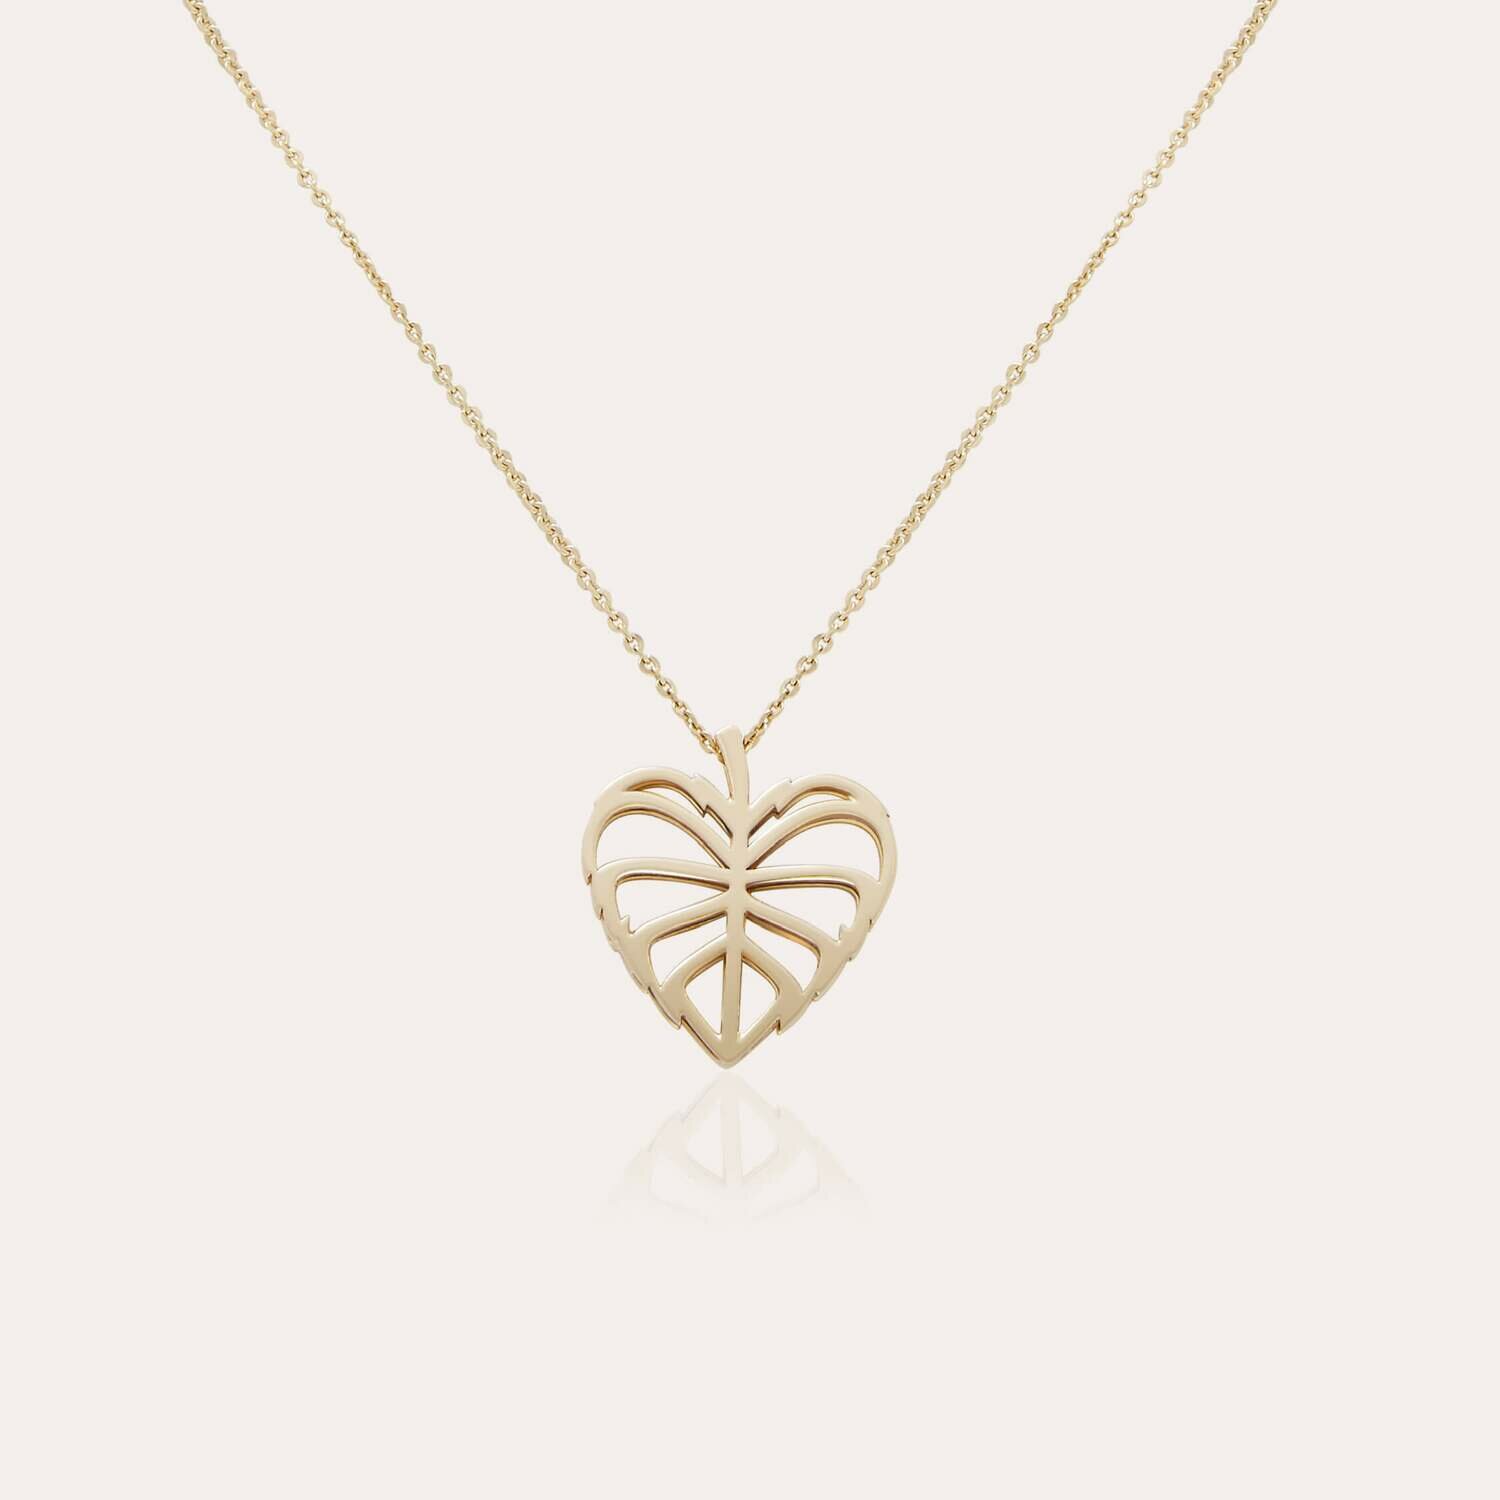 Leaves Gold Necklace Heart